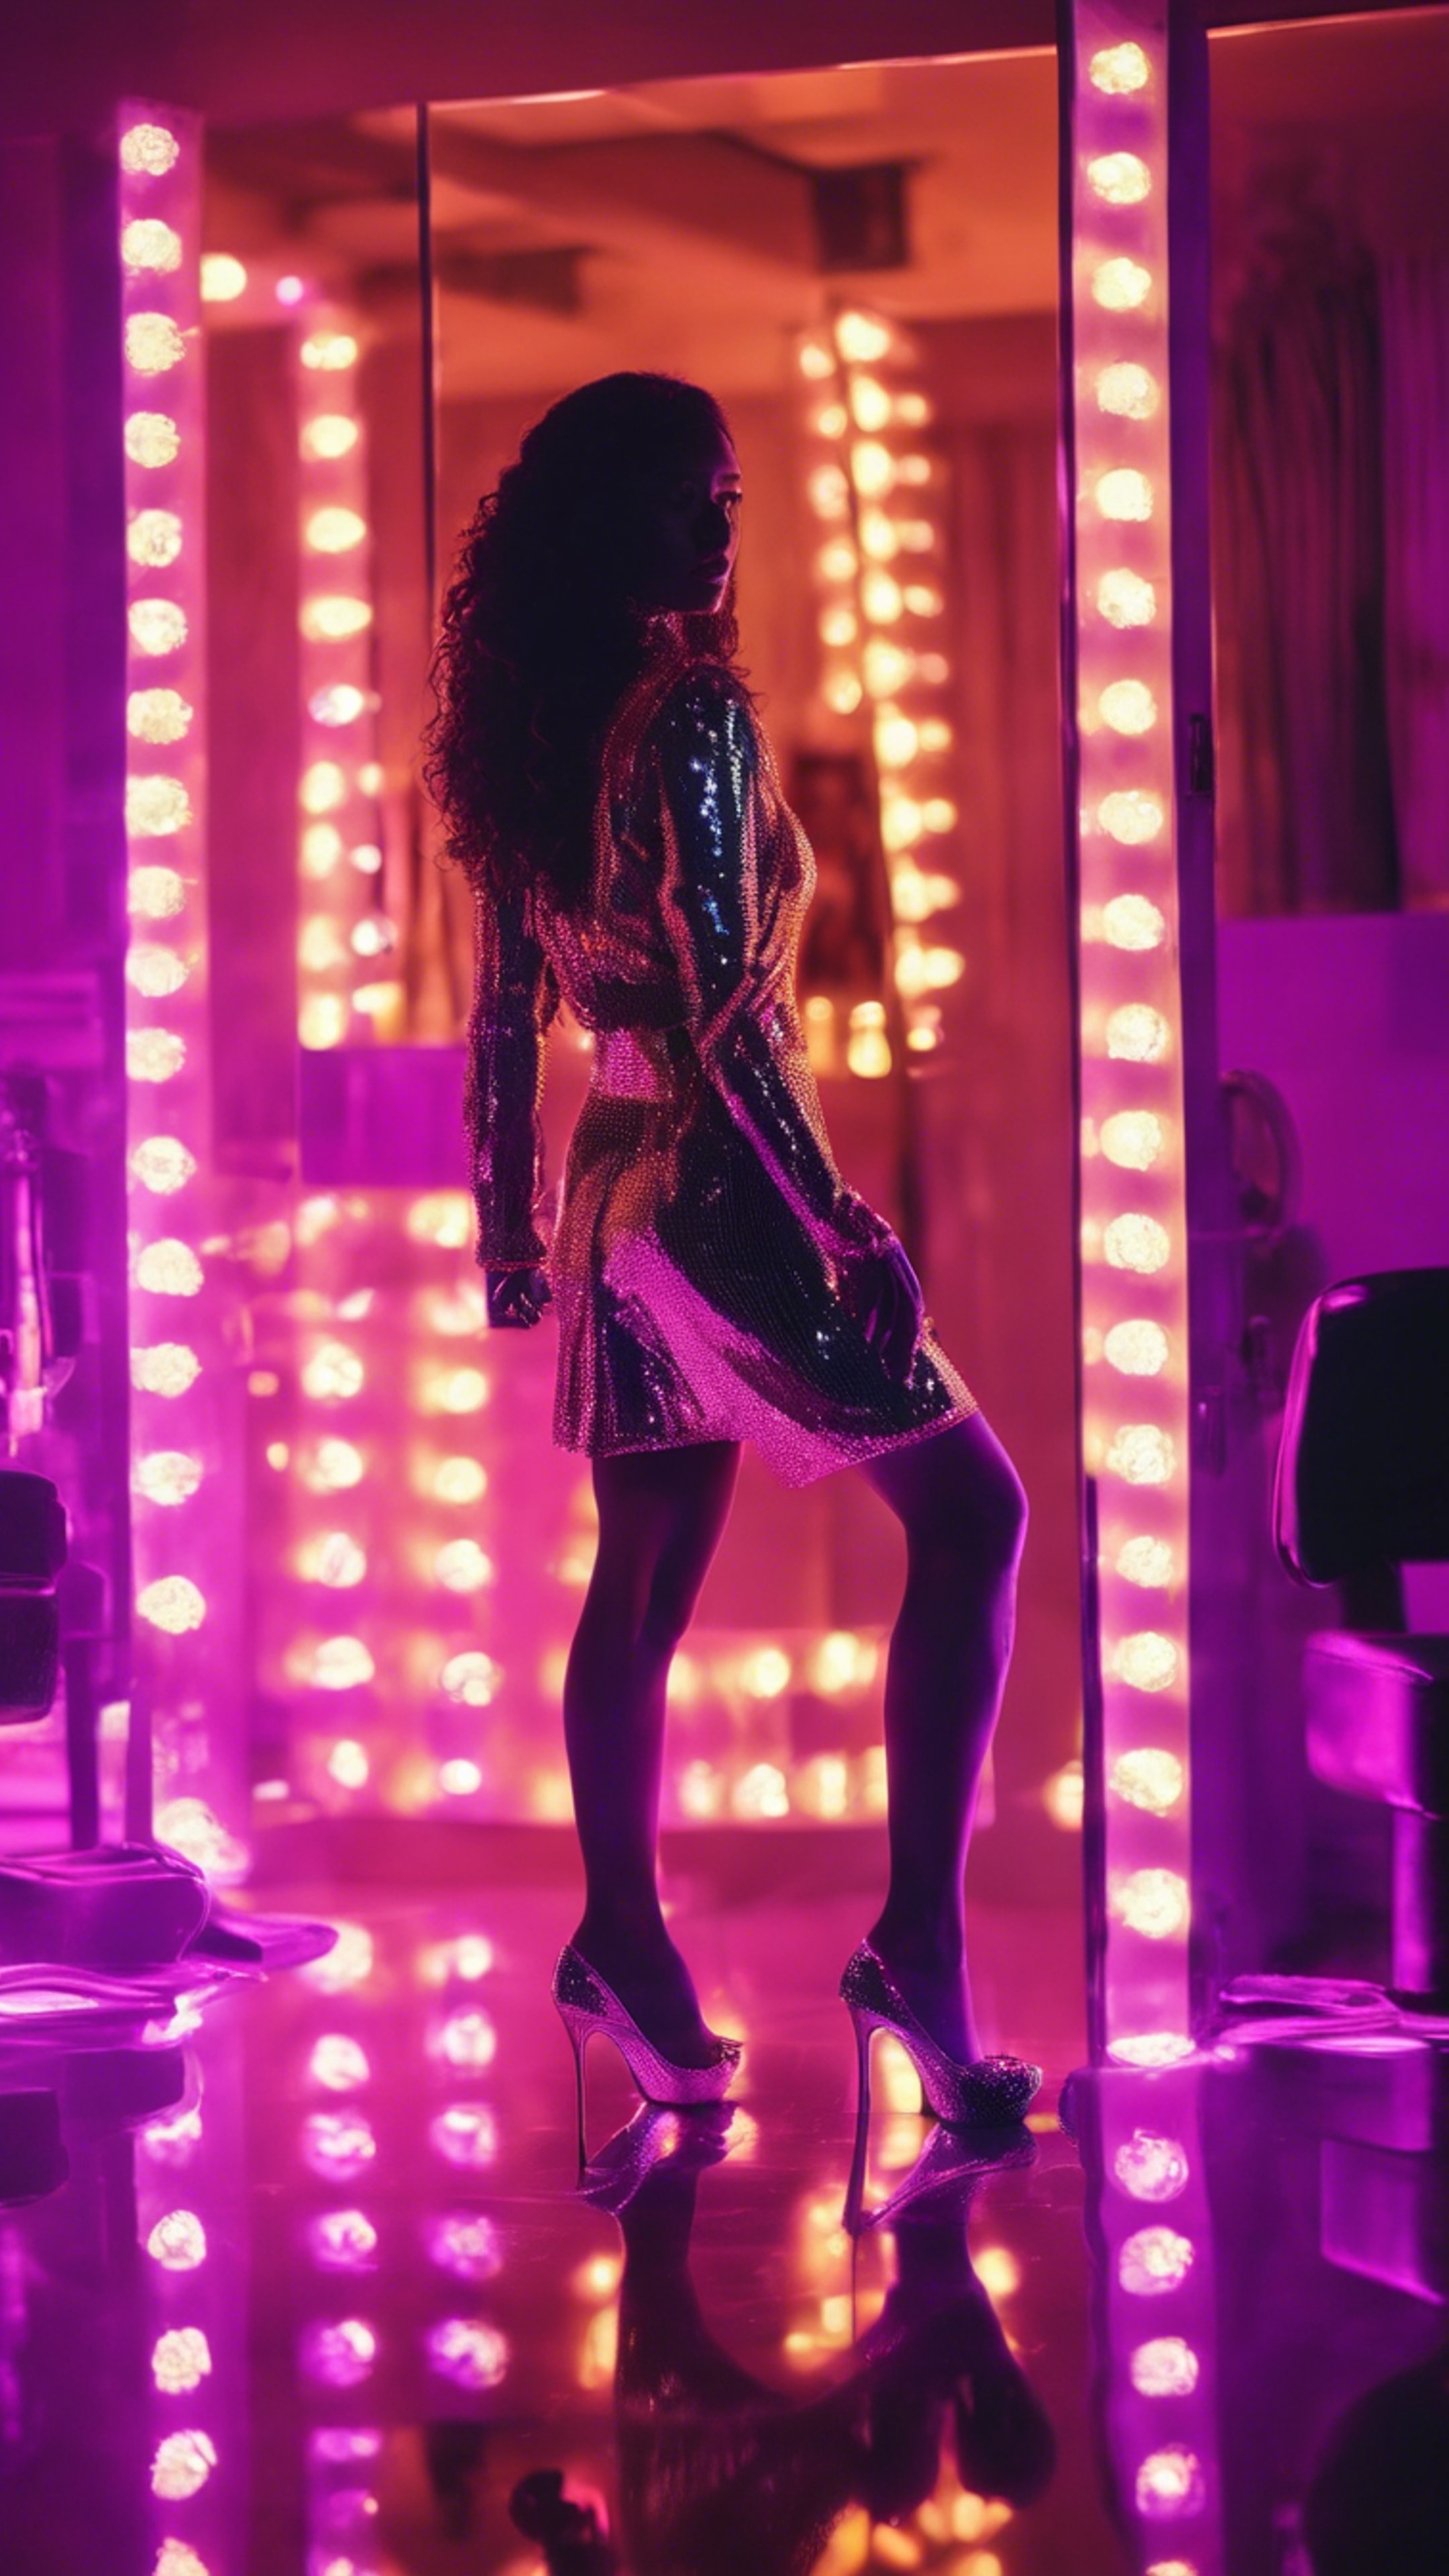 A confident baddie in a neon-lit room, dressed in sequins and high heels, her silhouette reflecting in the mirror. Hình nền[dd190a8a8fd944b882f7]